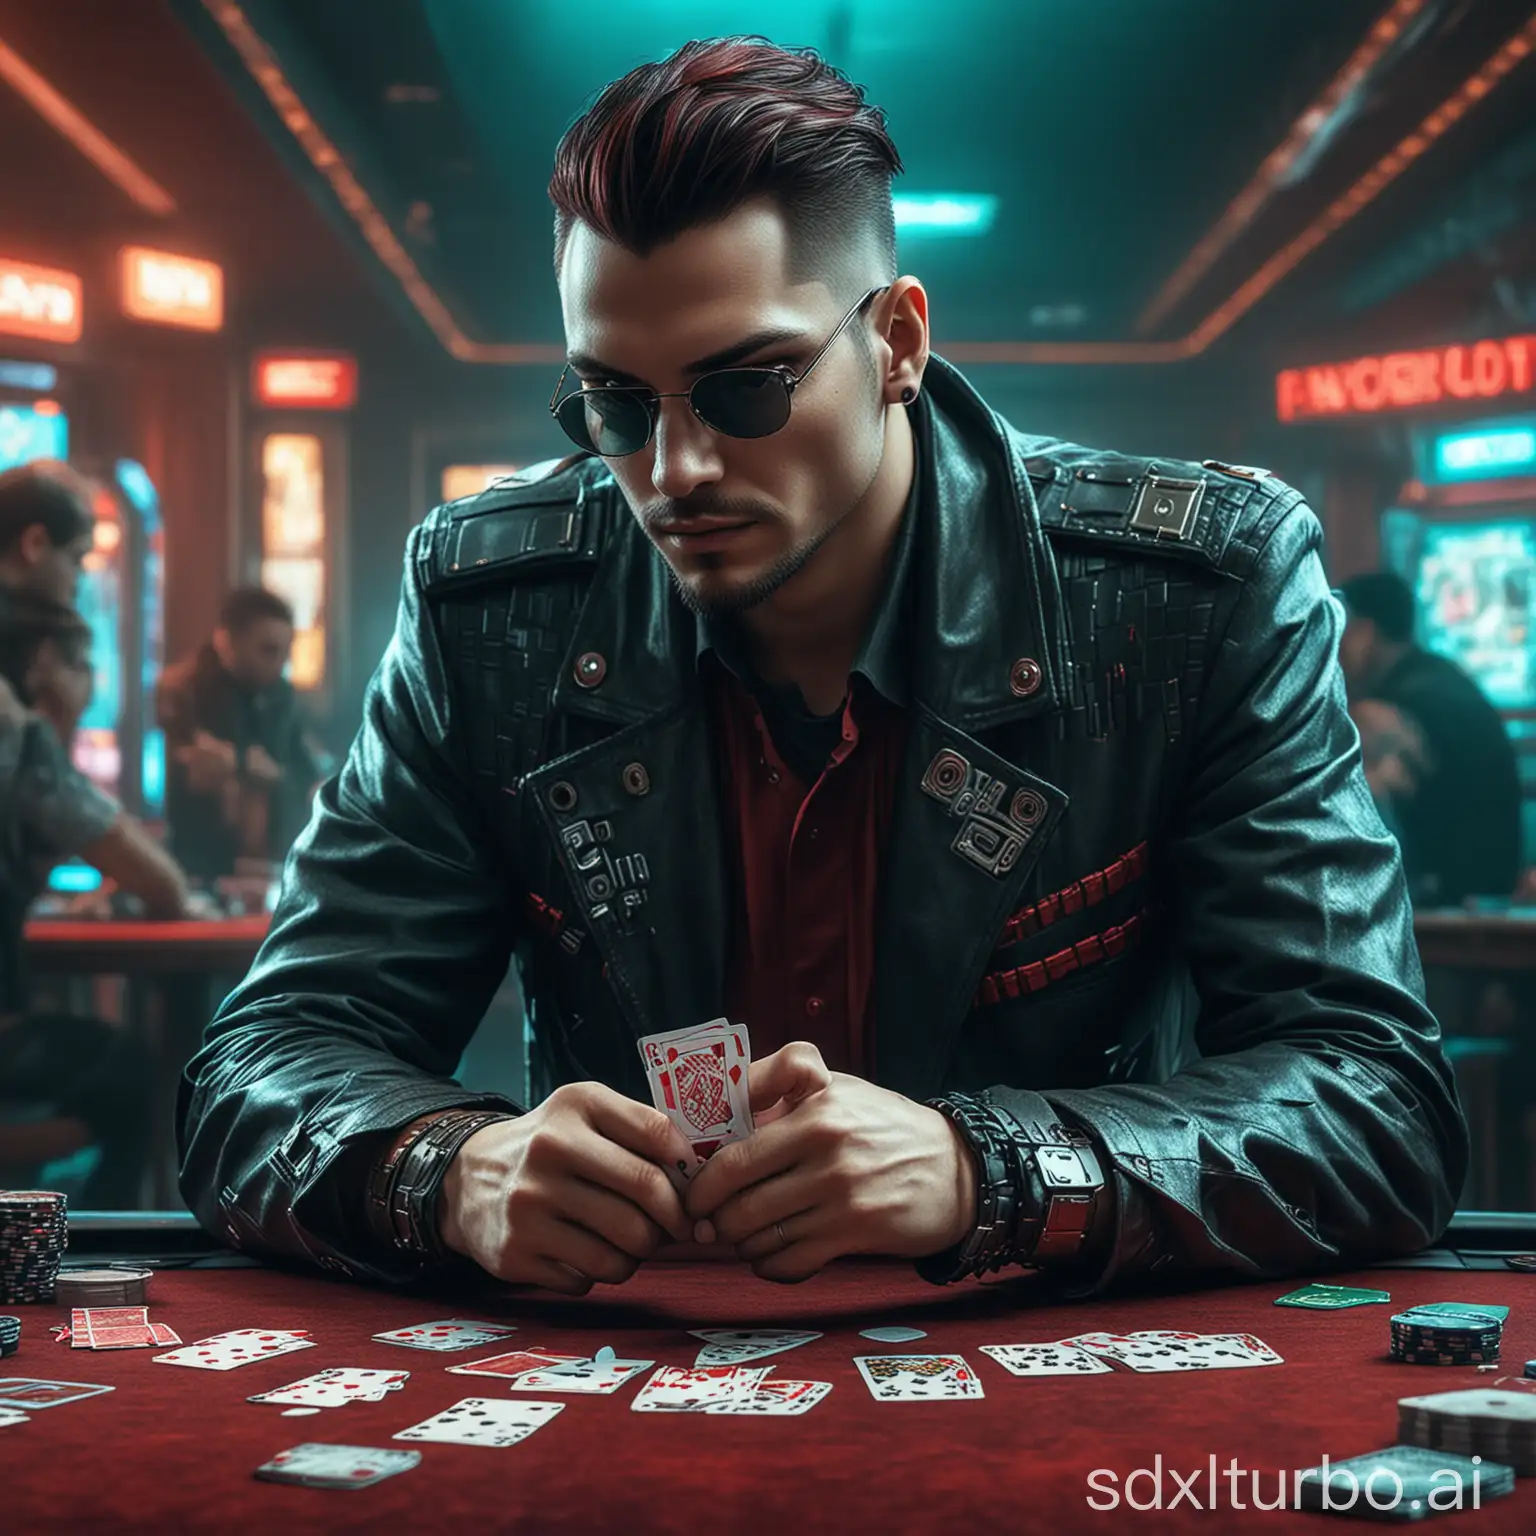 Cyberpunk-Men-Playing-Cards-at-Casino-Table-Digital-Art-Poster